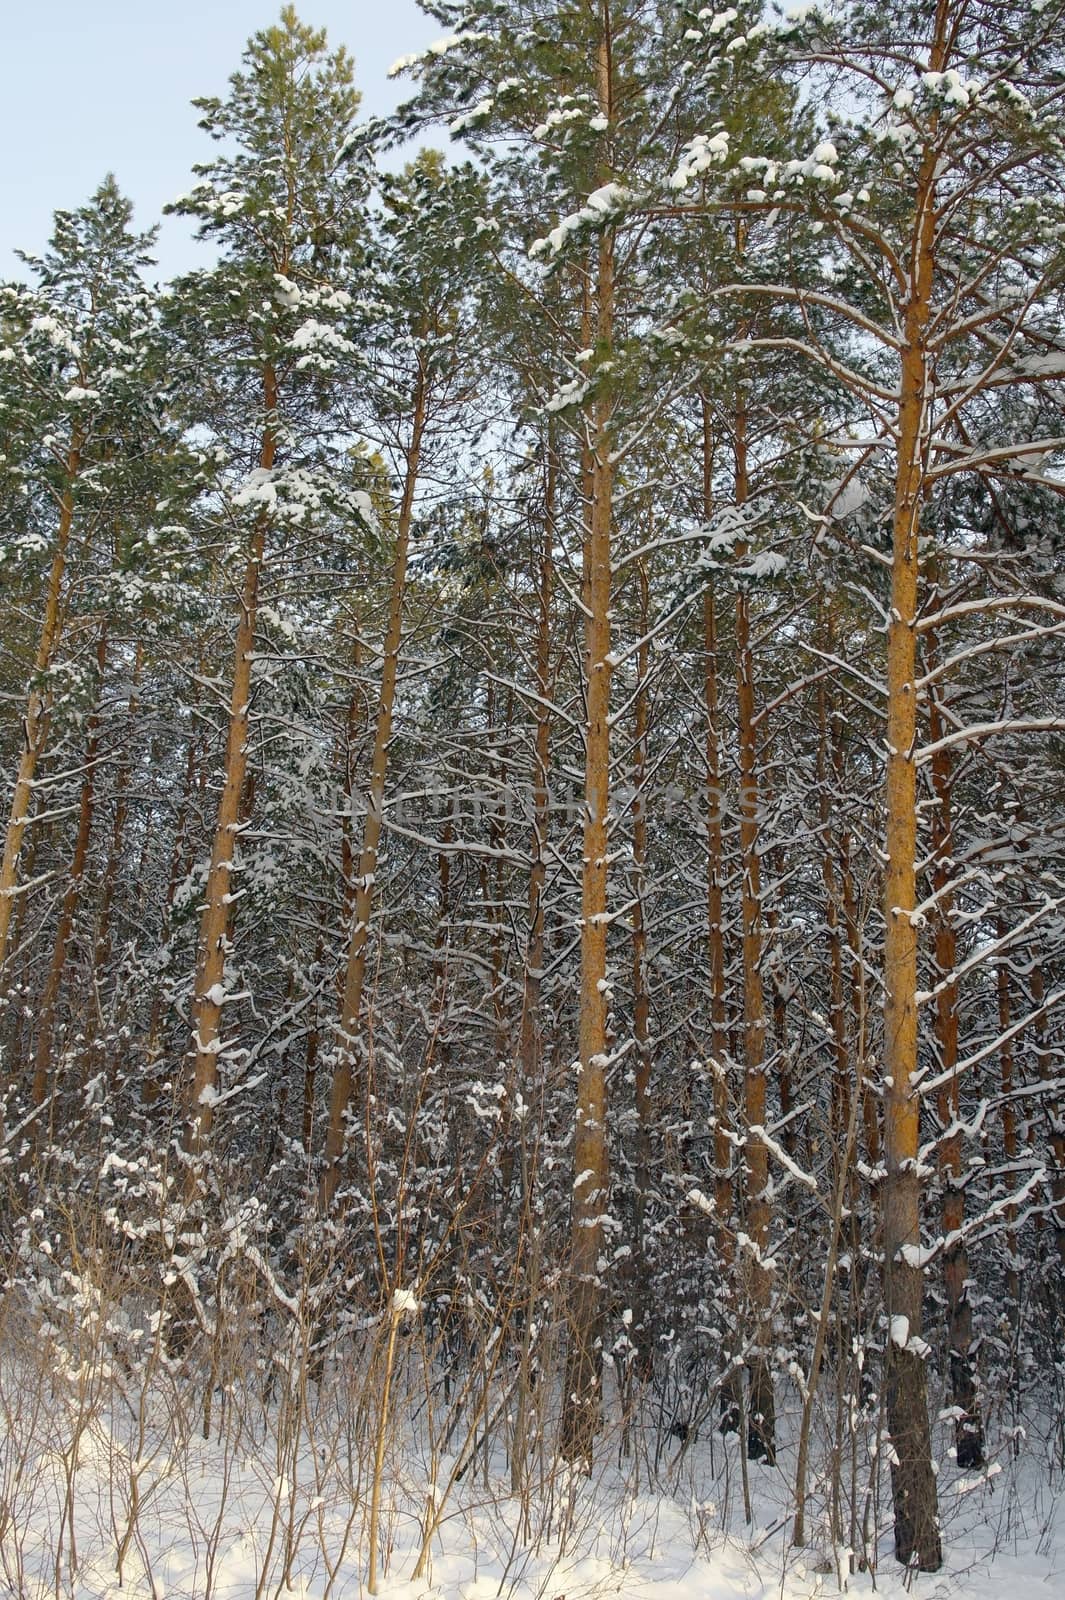 Winter landscape in forest with pines after snowfall